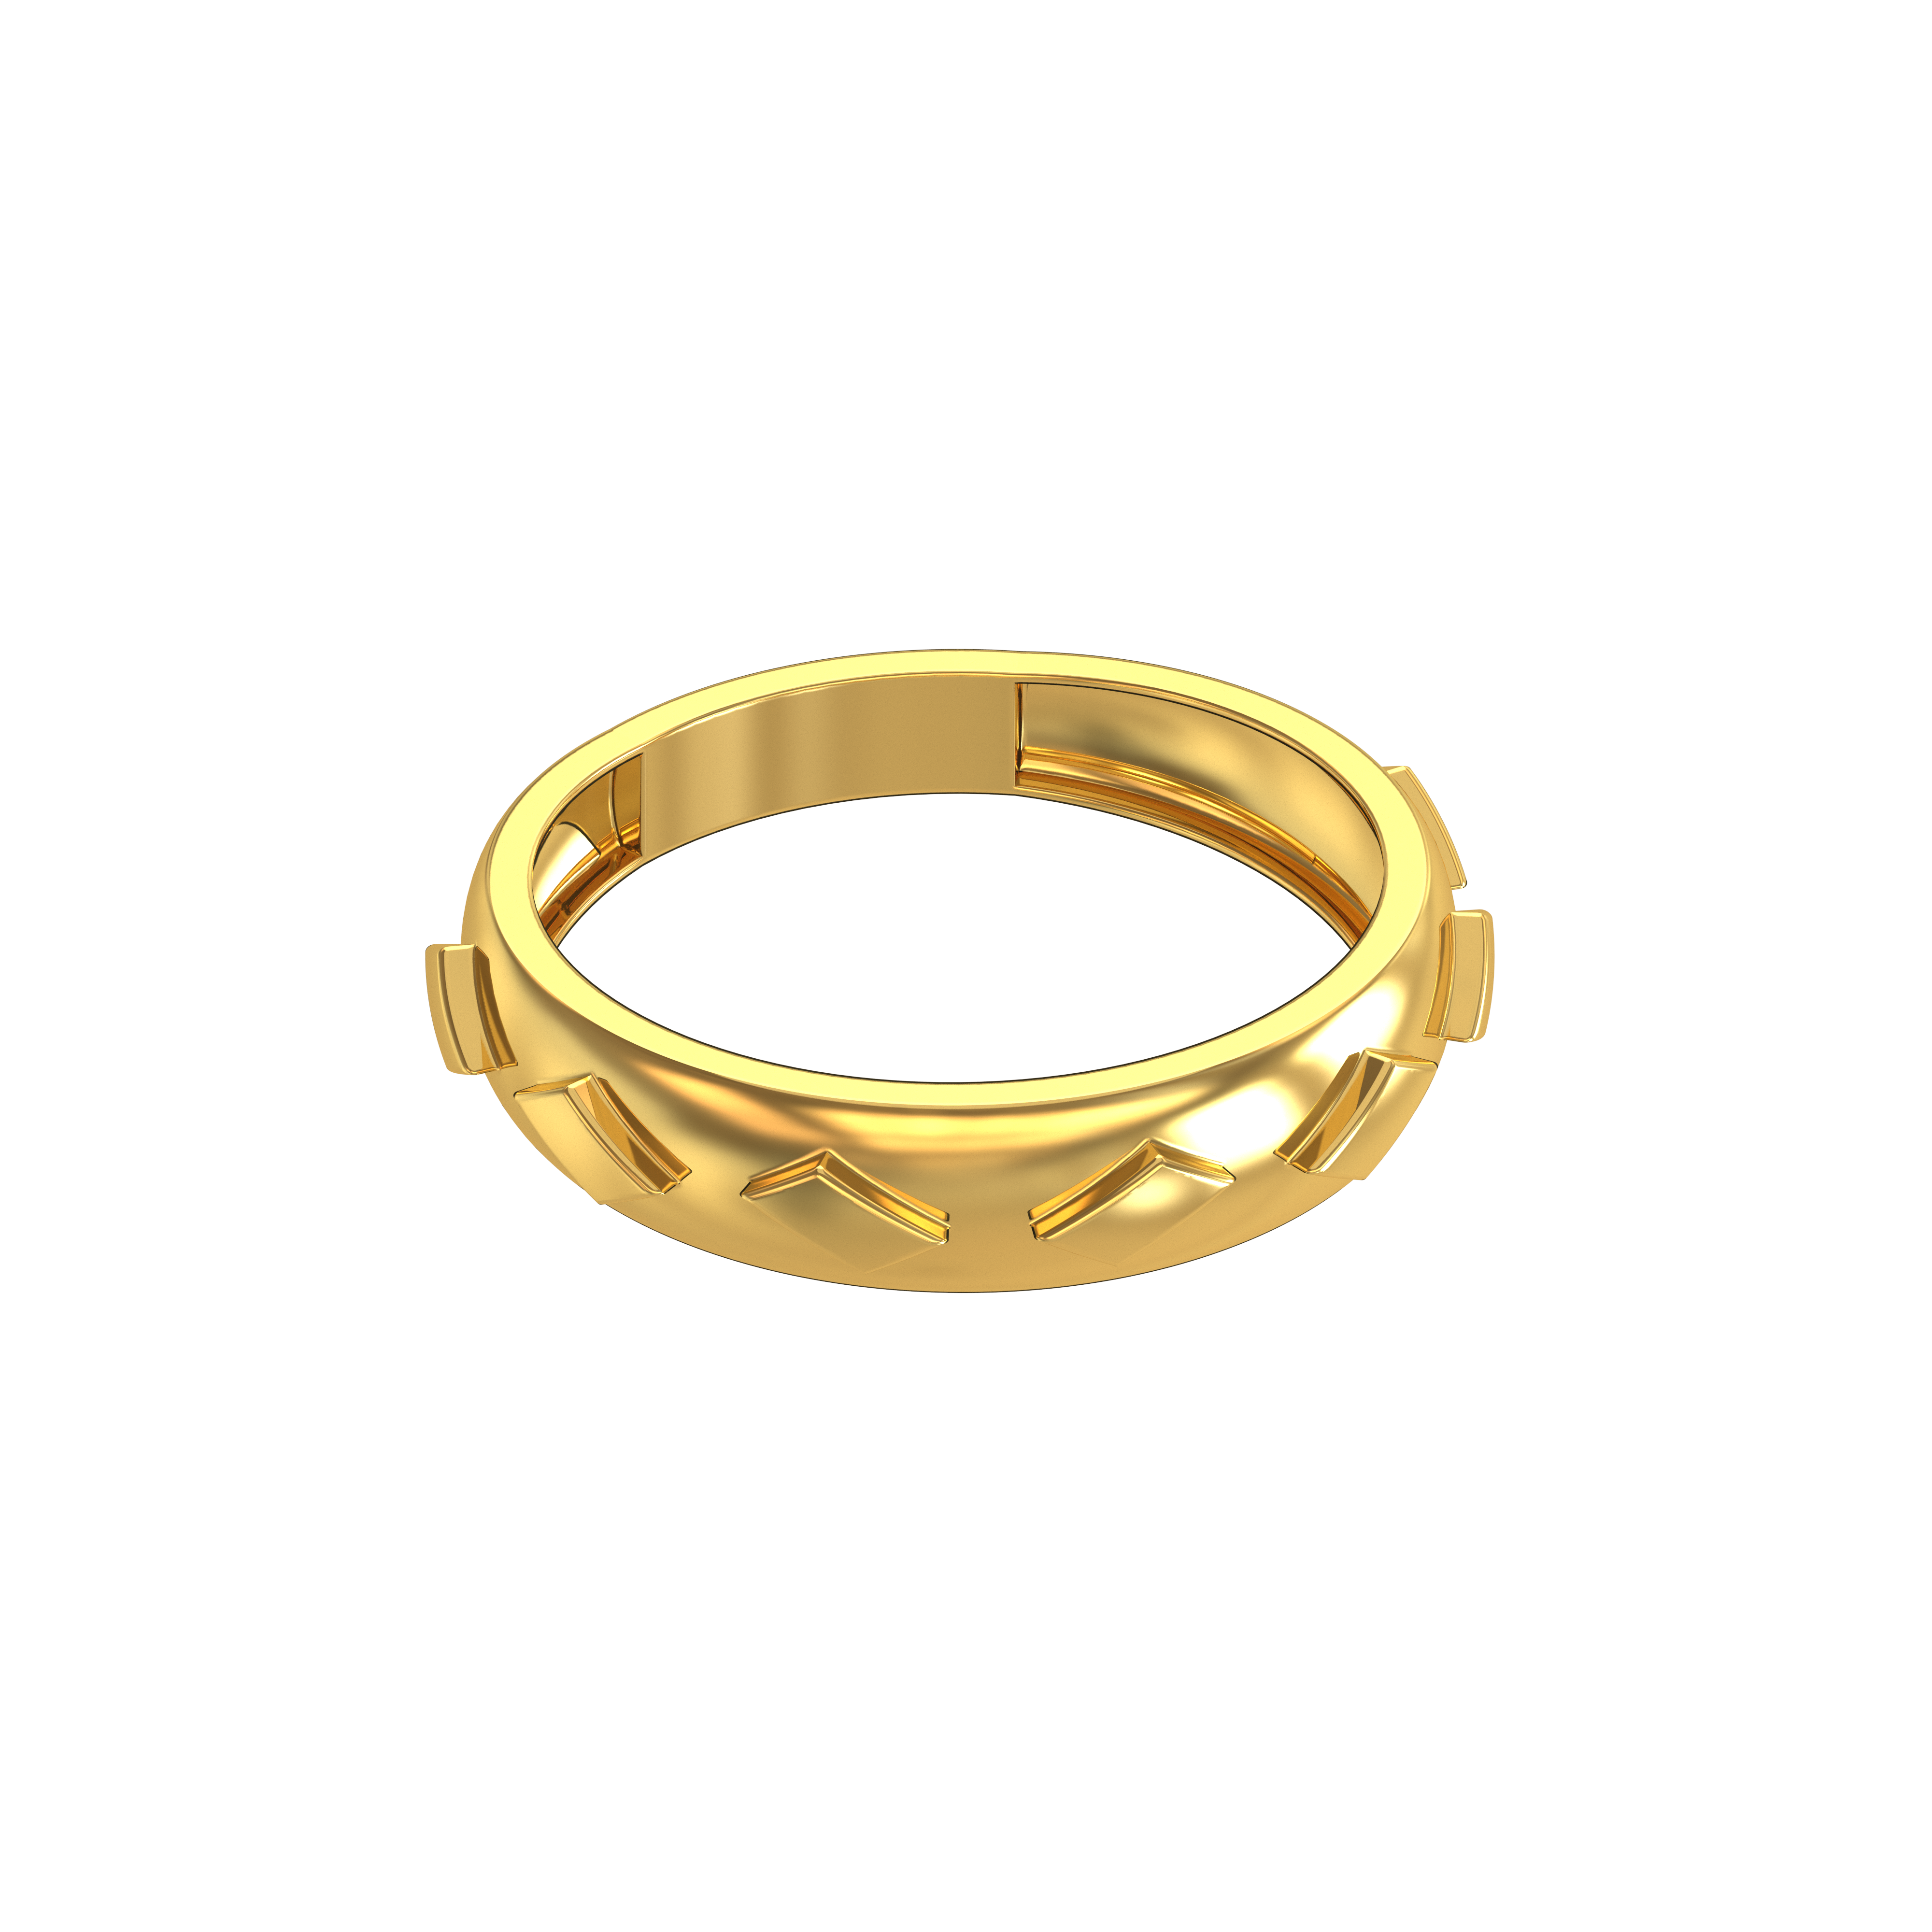 22kt Gold Classic Mens Ring - RiMs26309 - US$ 575 - 22kt Gold Classic Mens  Ring. Ring is designed with machine cuts in combination with matte finish.